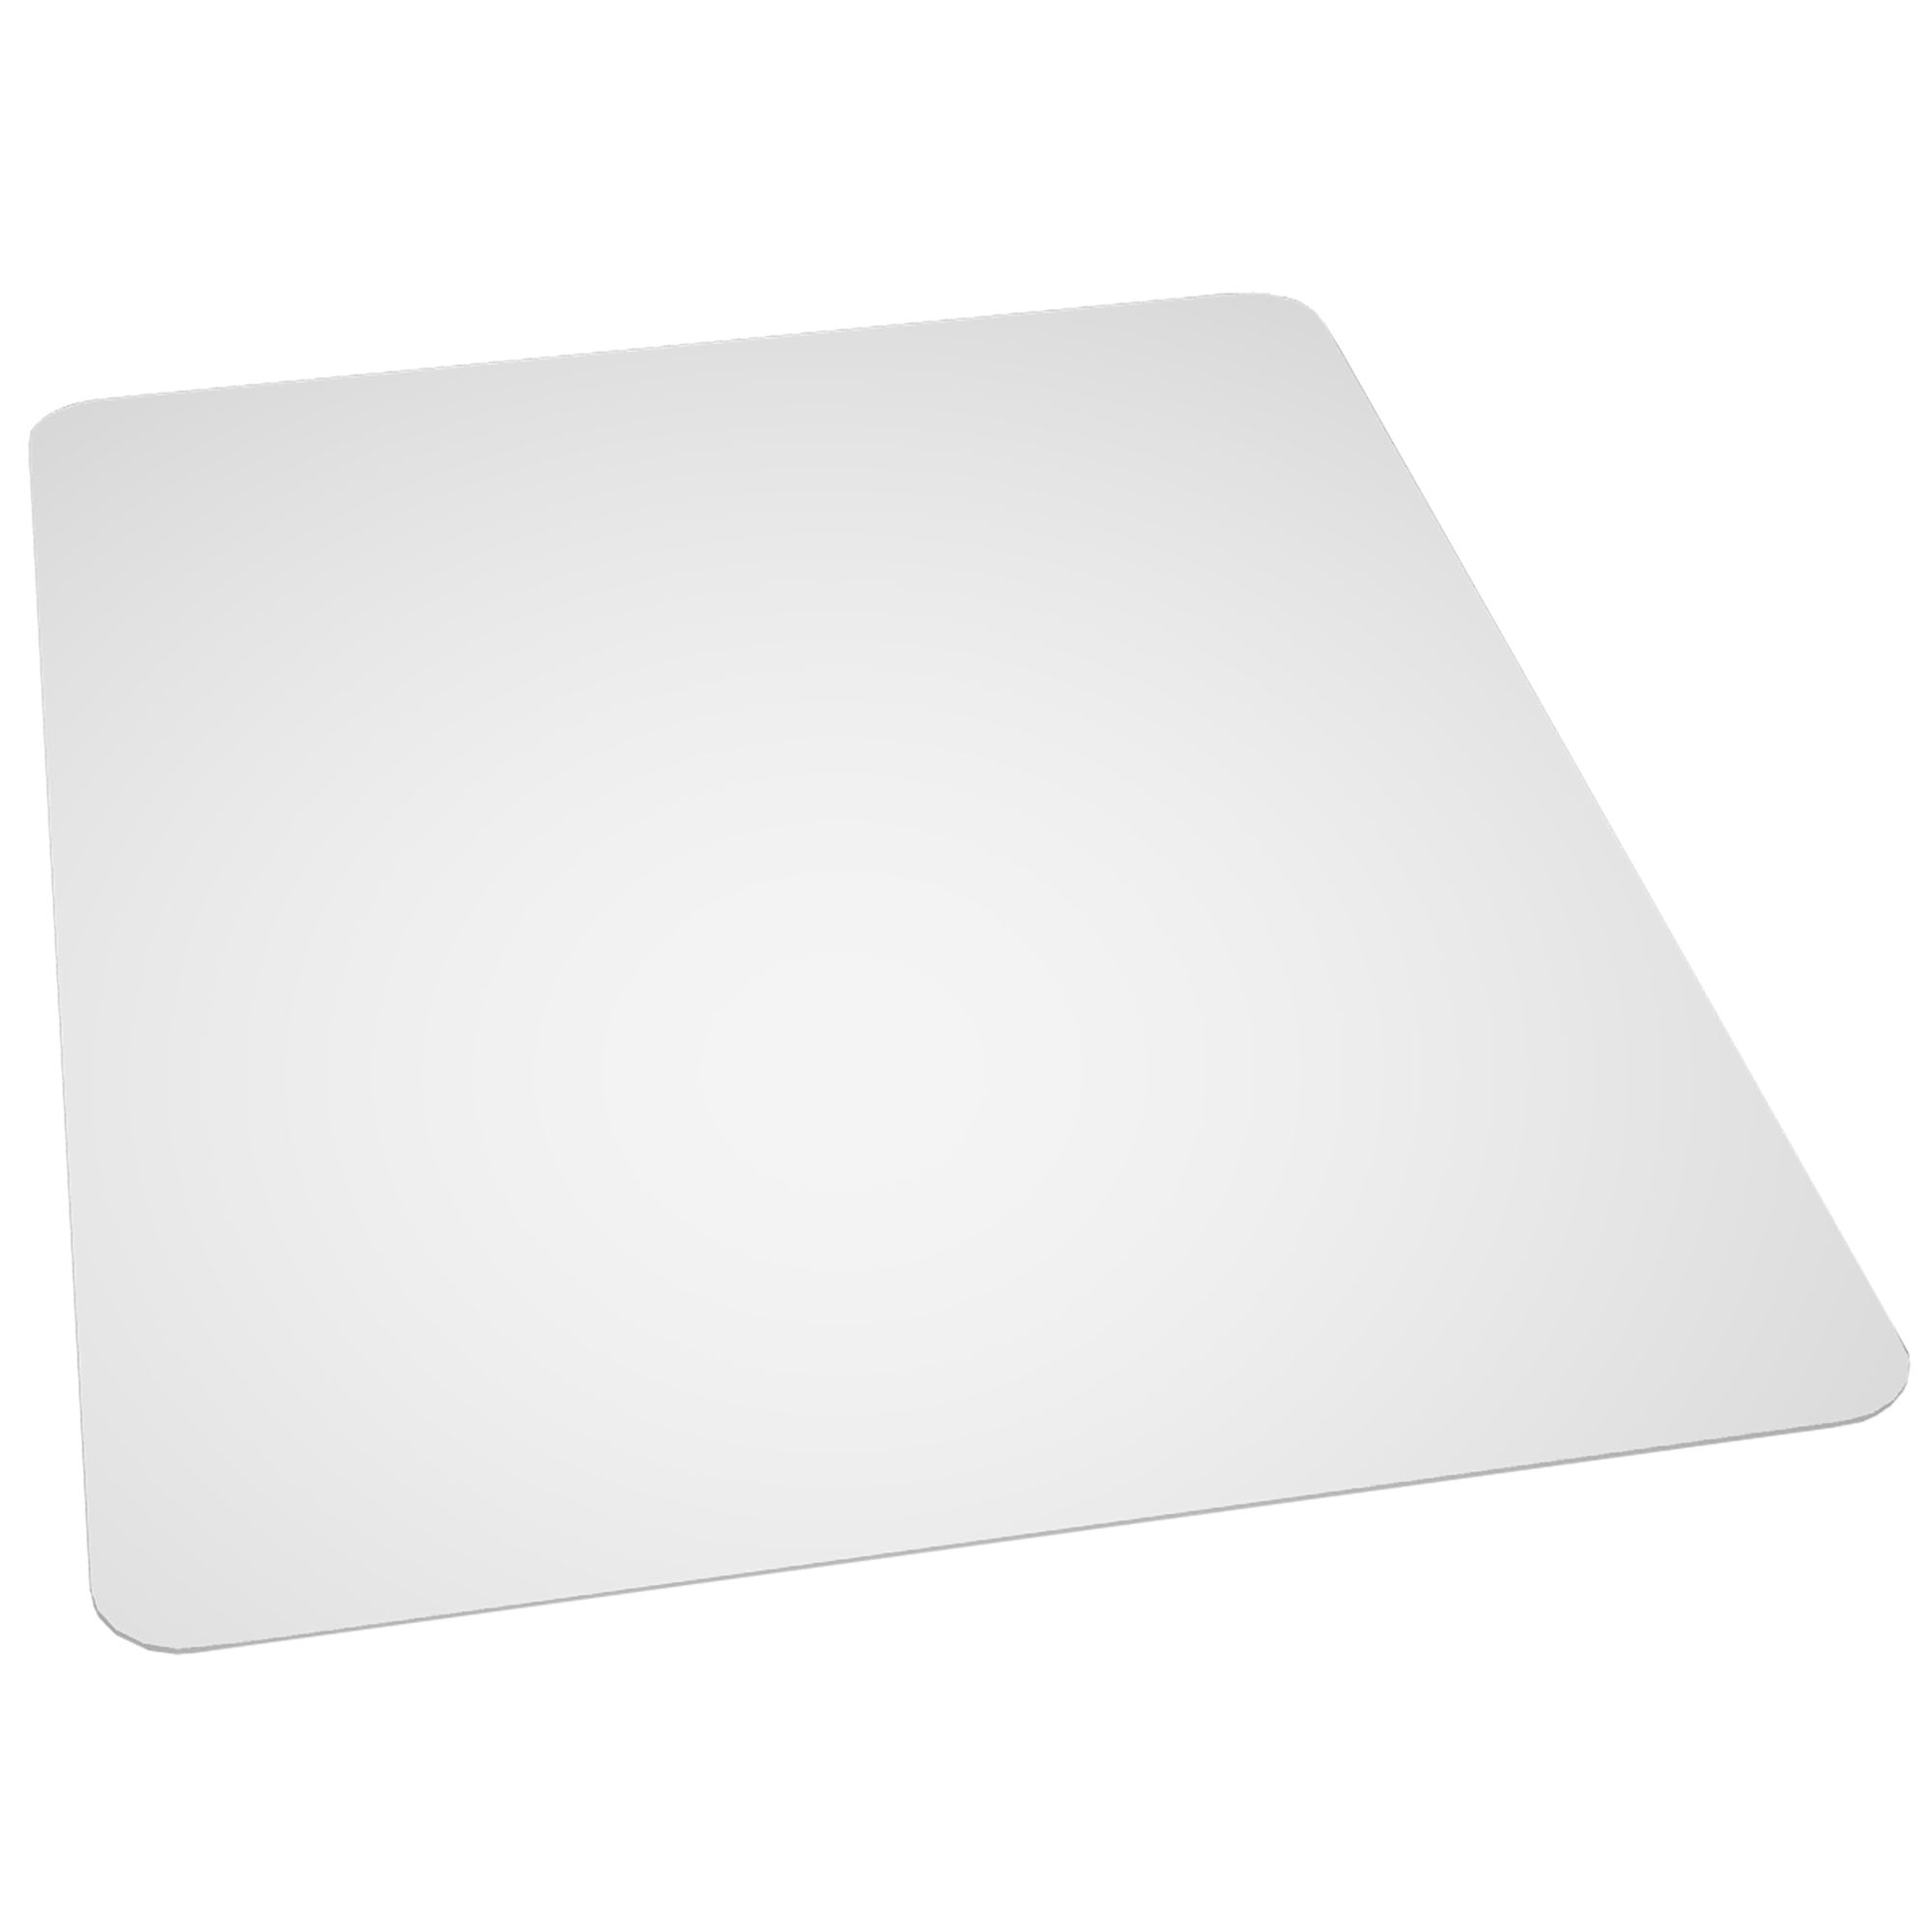 Picture of ES Robbins 128381 Beveled Edge Chair Mat for Low to Medium Pile Carpet - 46 in. W x 60 in. L